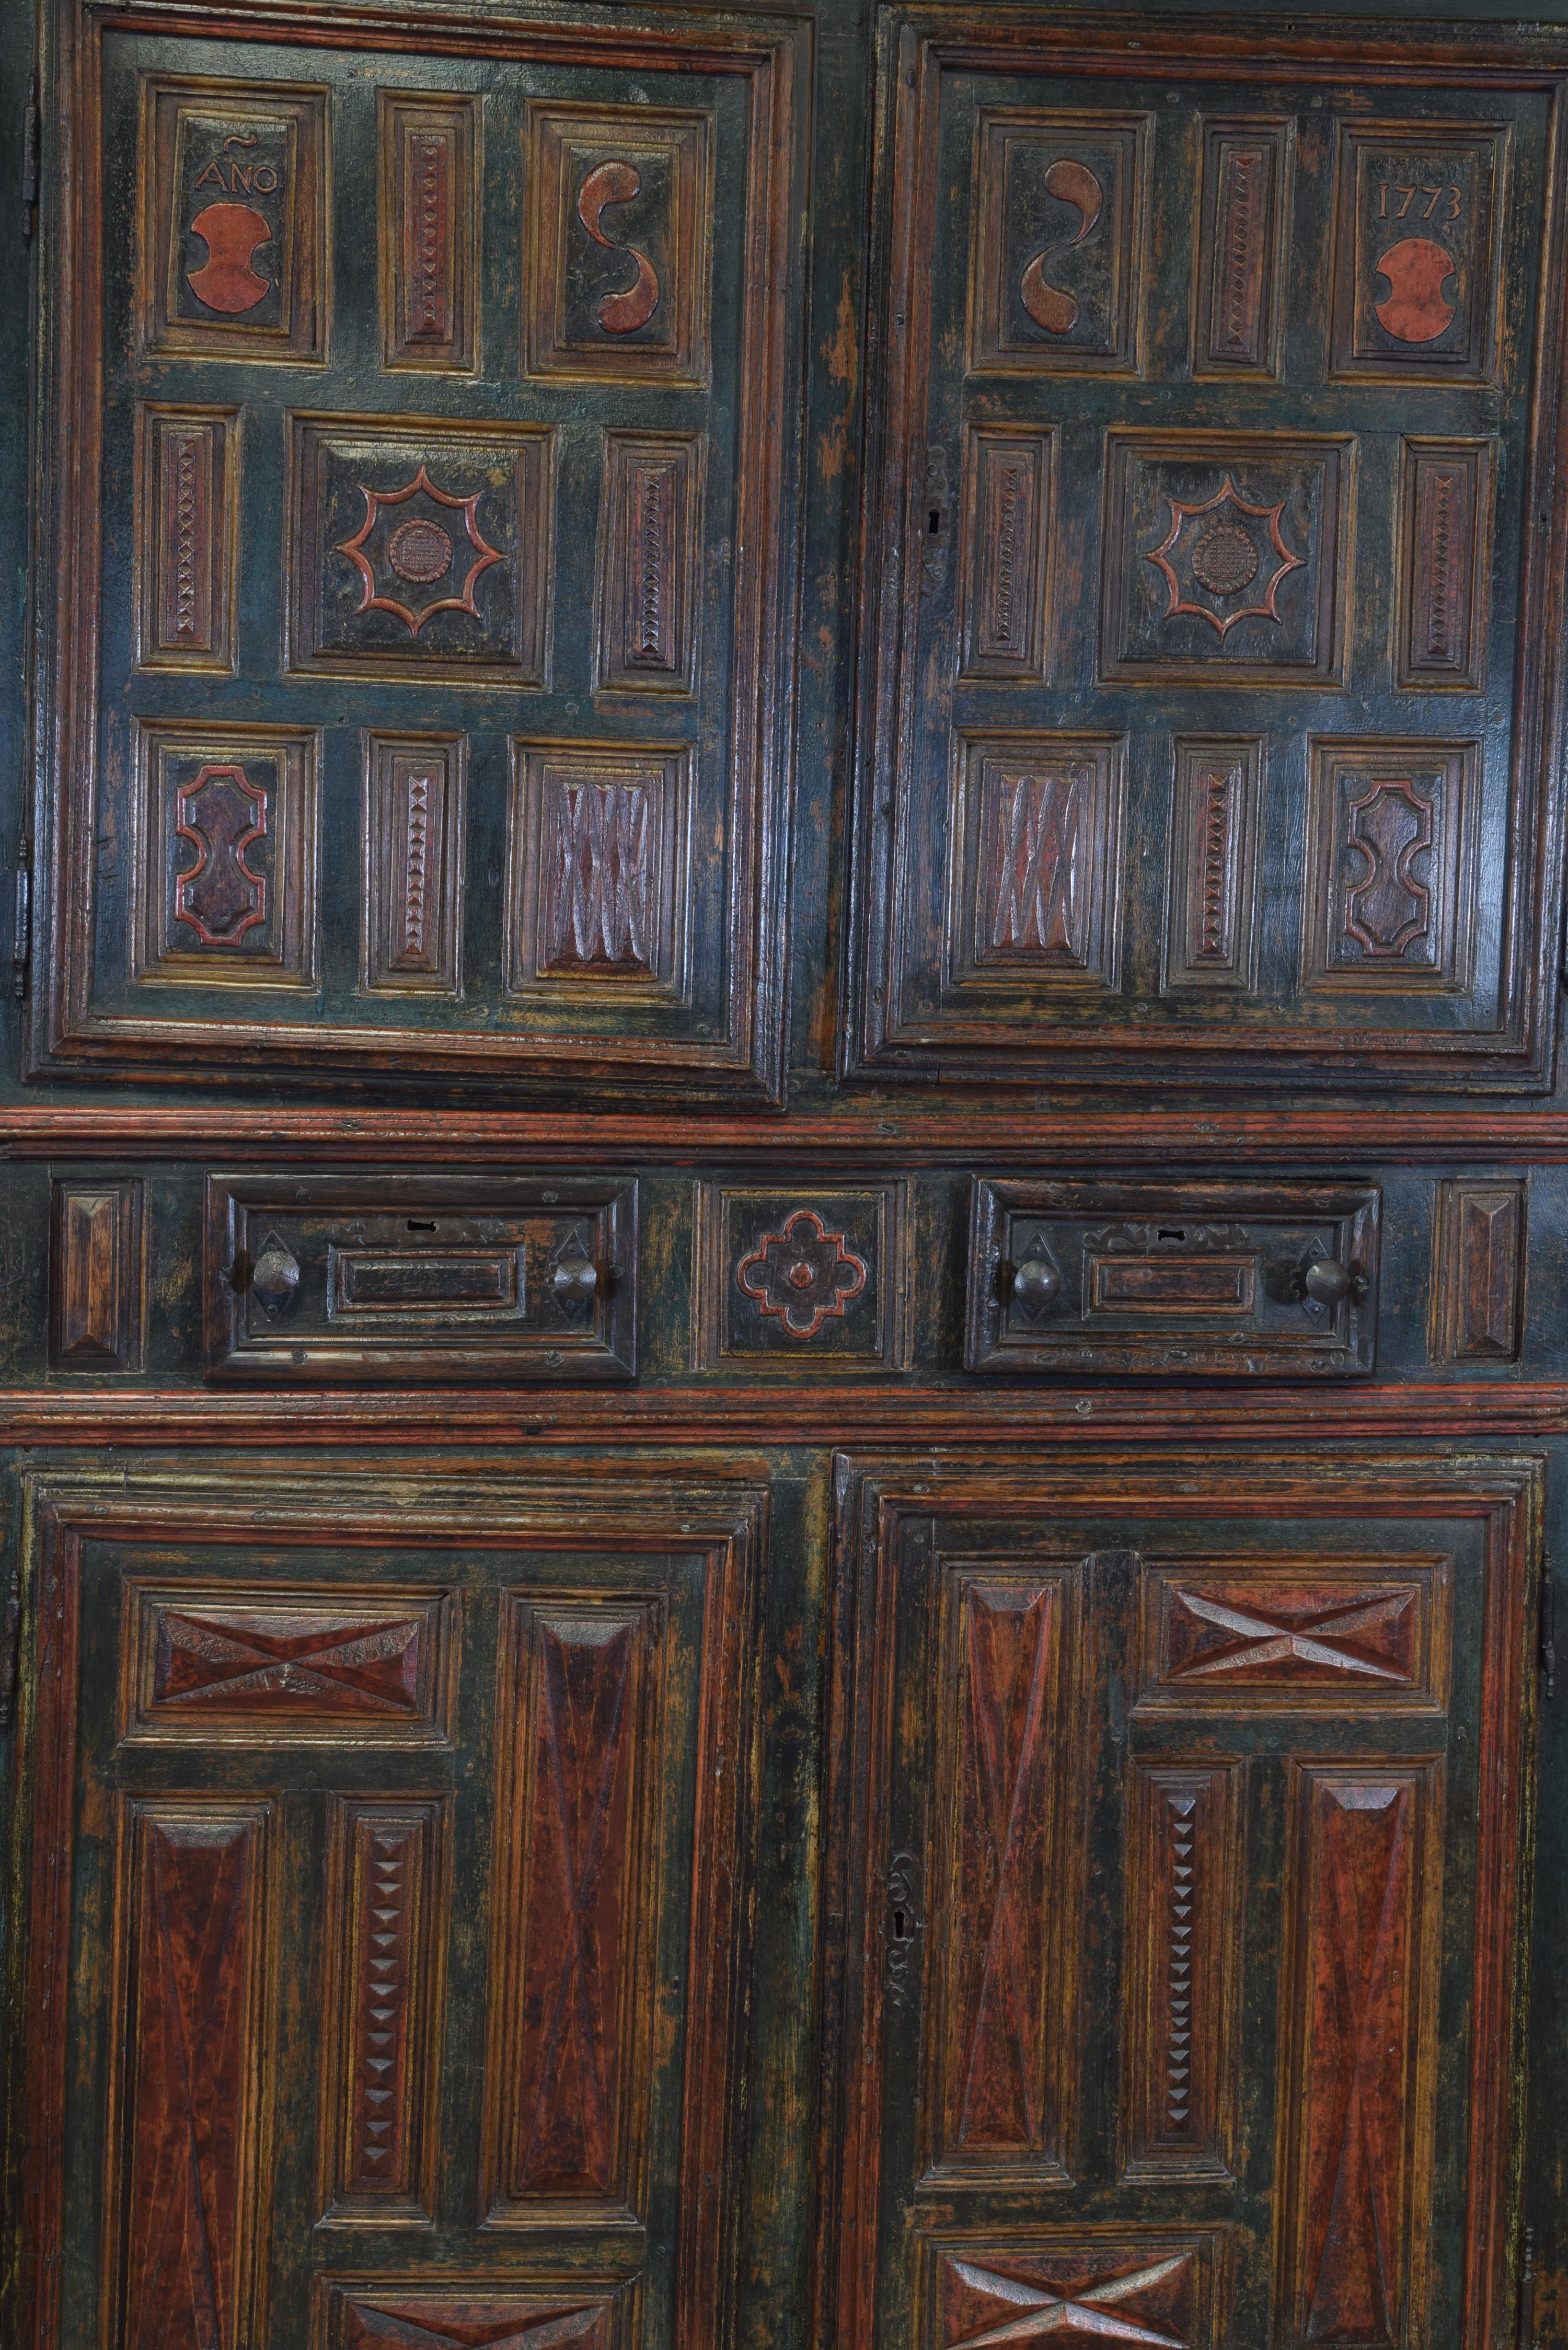 Polychromed Wood and Iron Cupboard. Spain, 1773. Dated 1